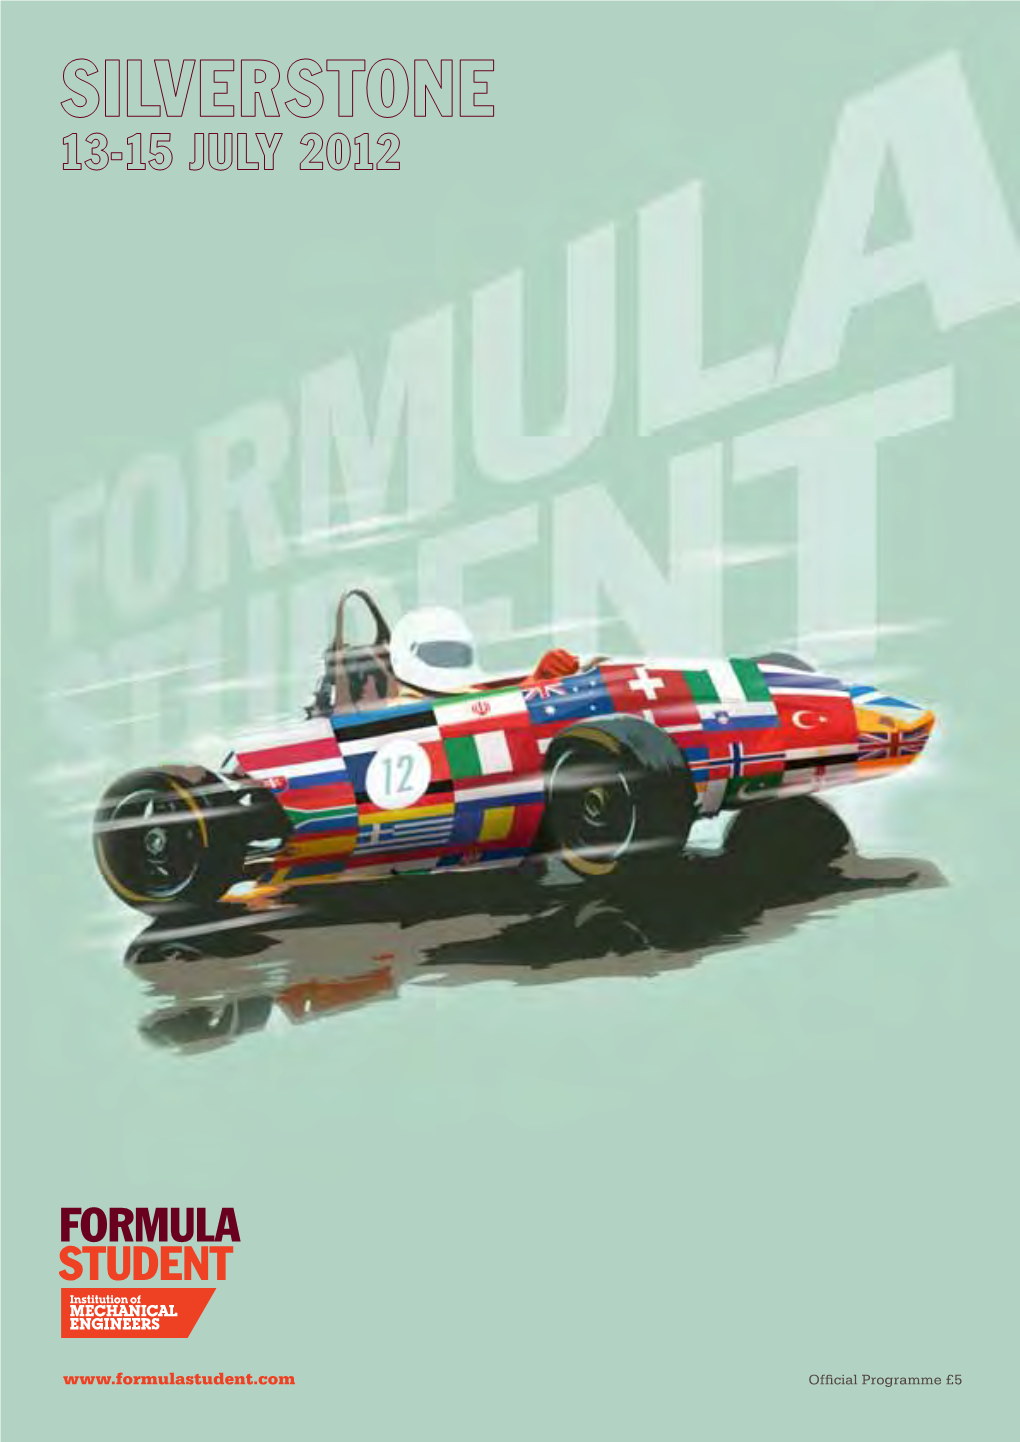 EXCLUSIVE OFFER for FORMULA STUDENT Racecar Engineering Racecar Leading-Edge Motorsport Technology Since 1990